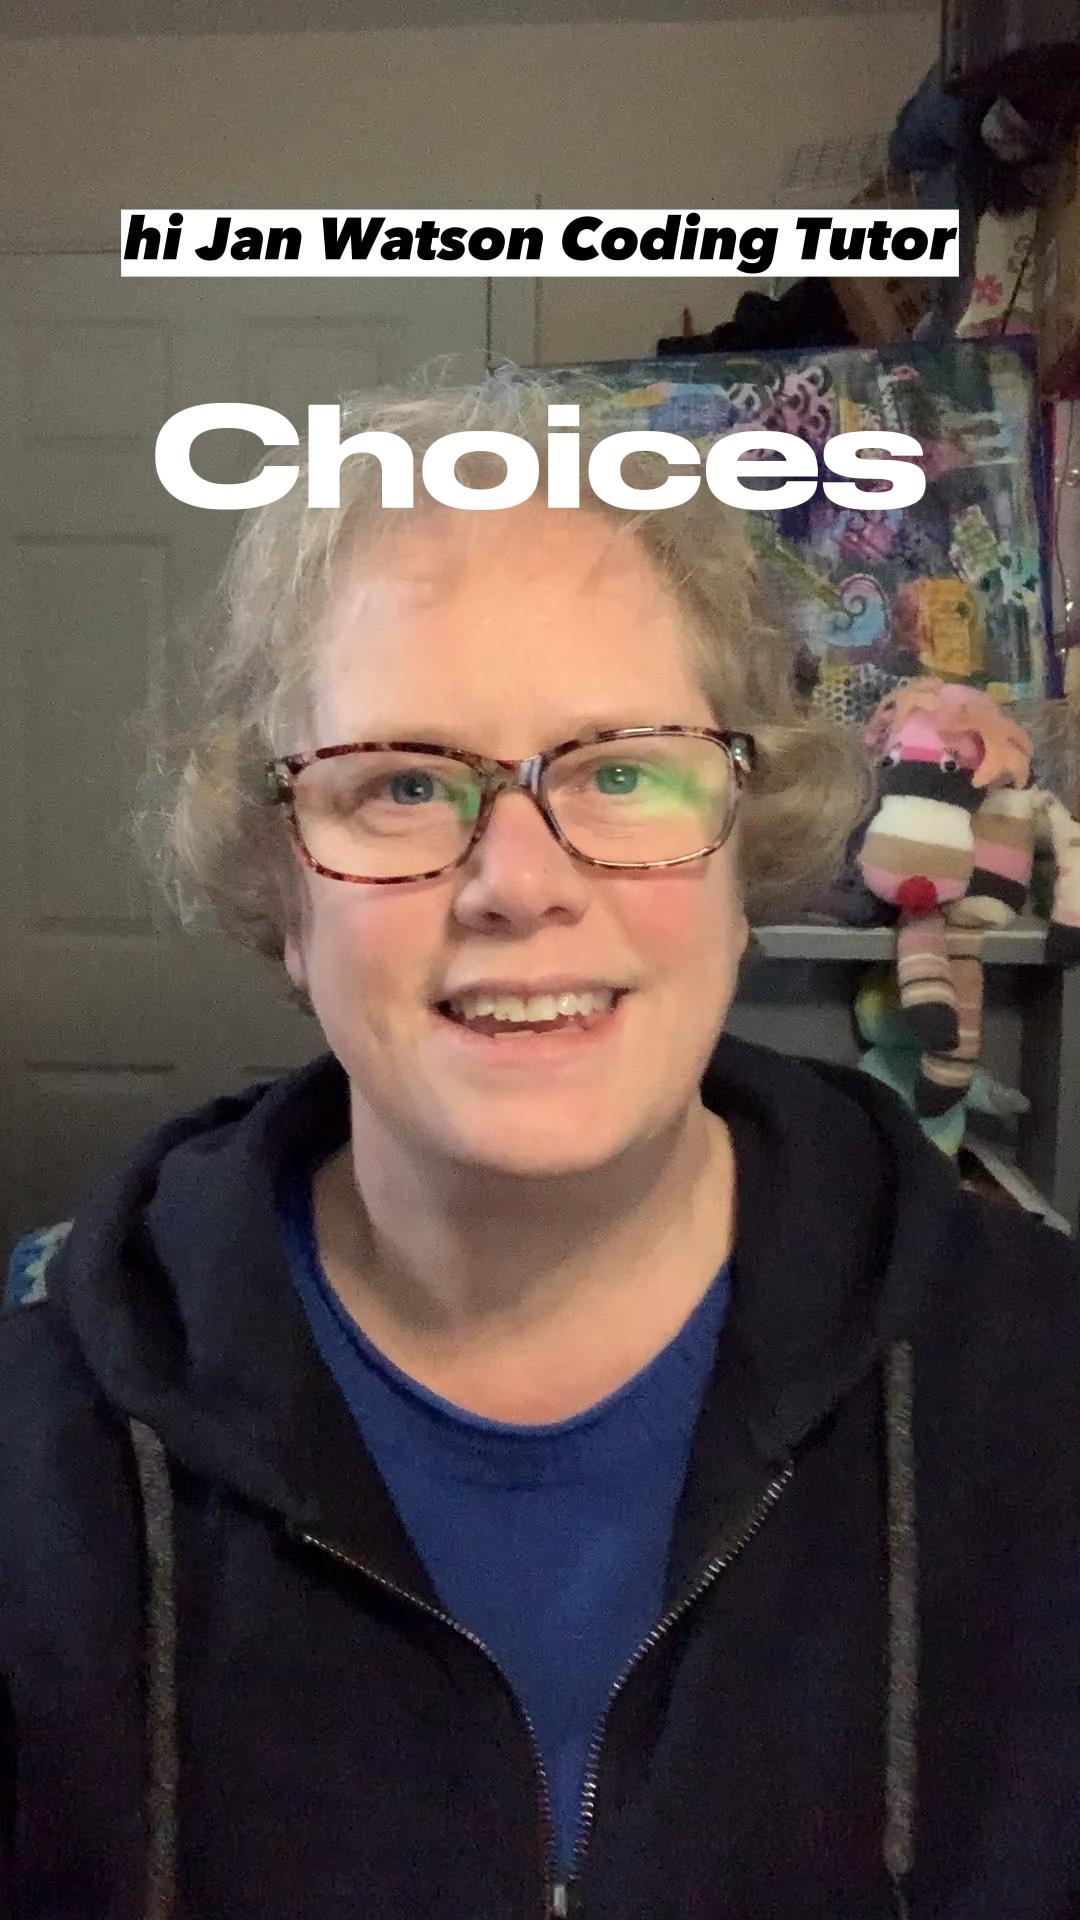 Image shows woman in glasses with the word choices above her head